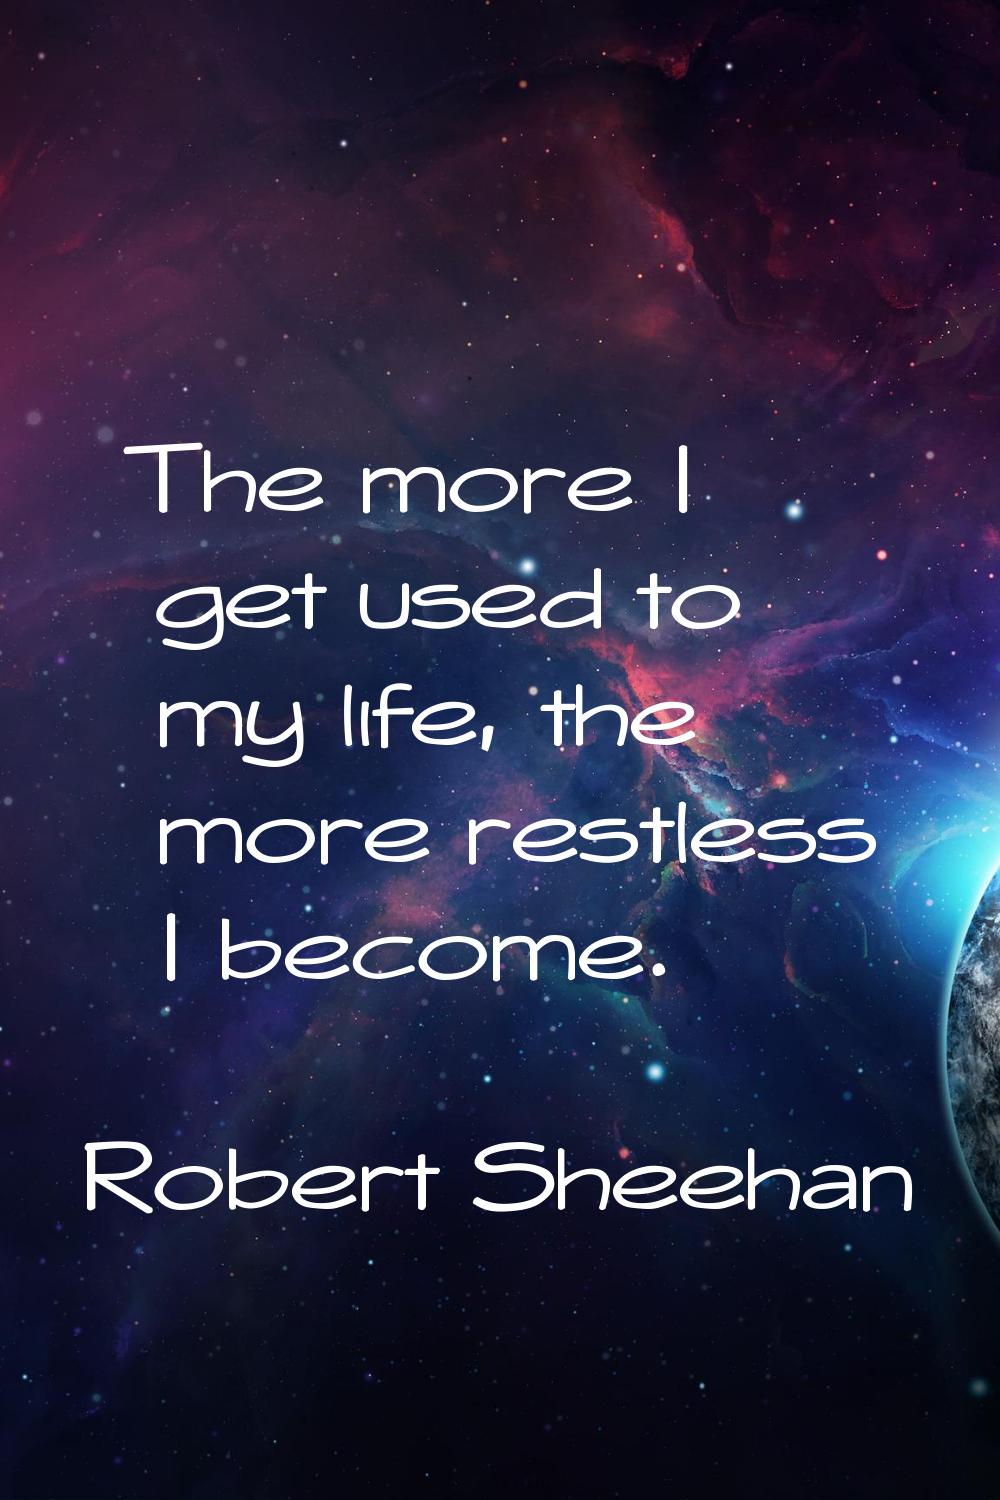 The more I get used to my life, the more restless I become.